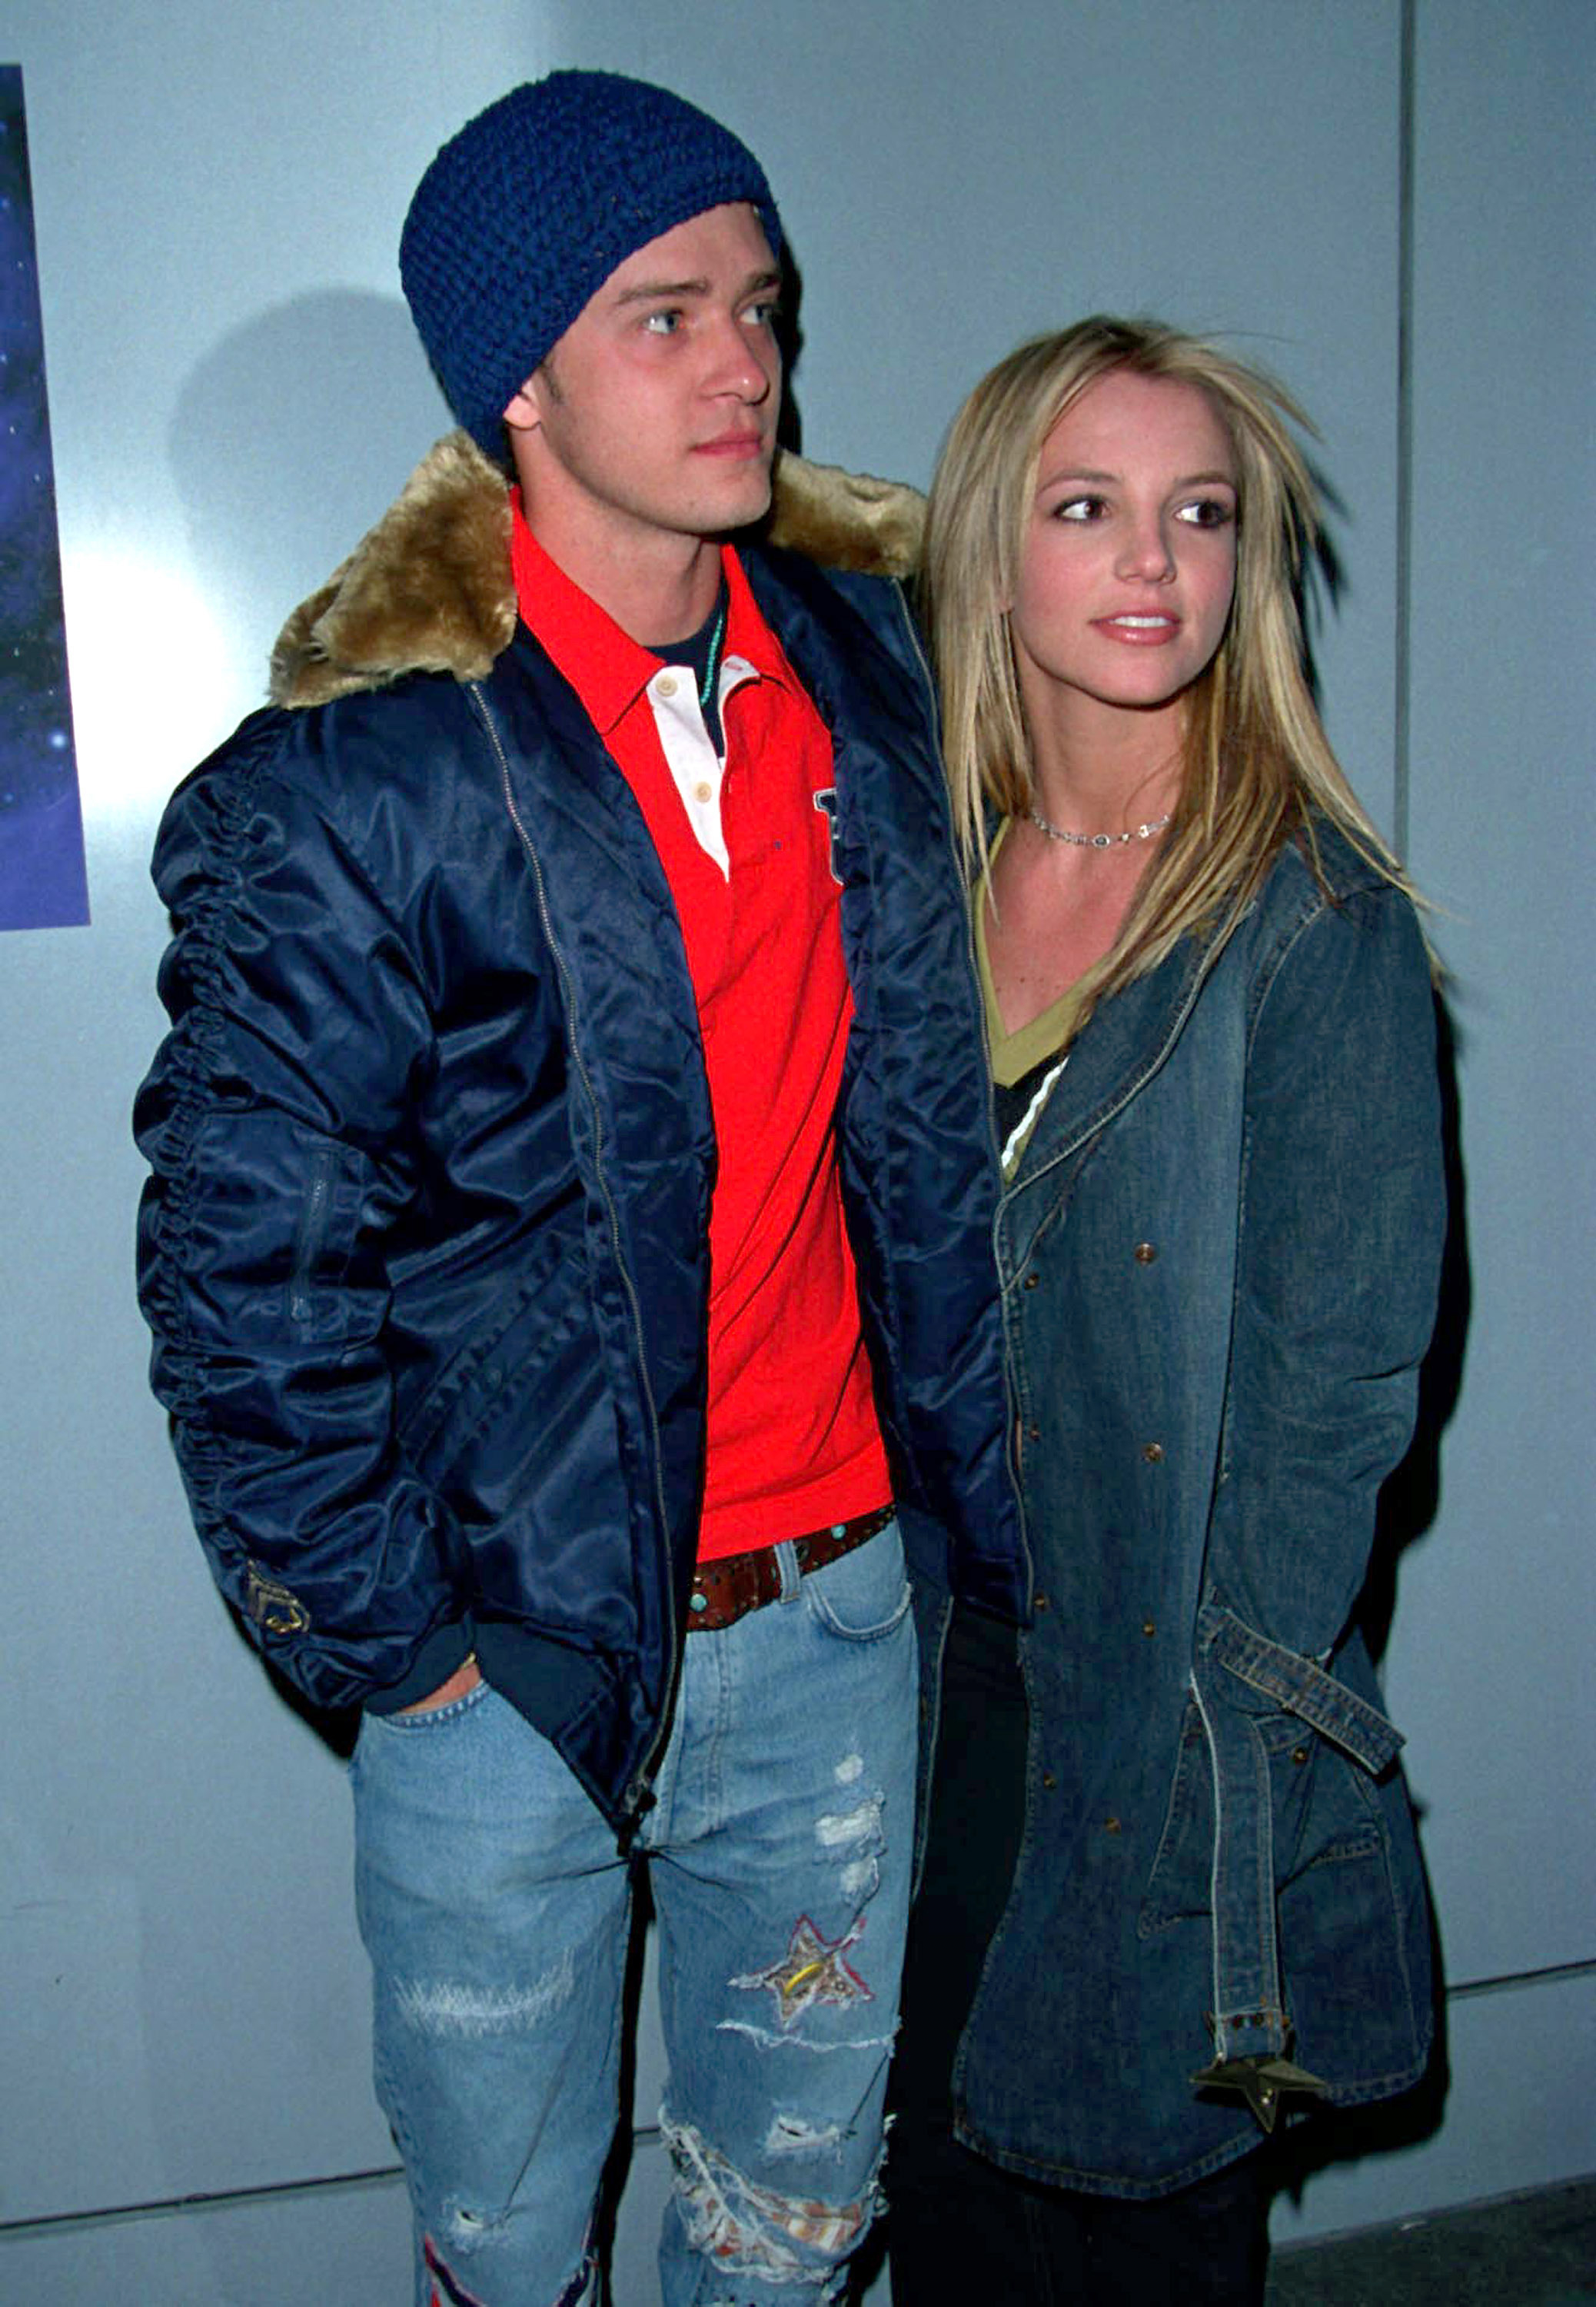 justin with his arm around britney while their bundled up in jackets